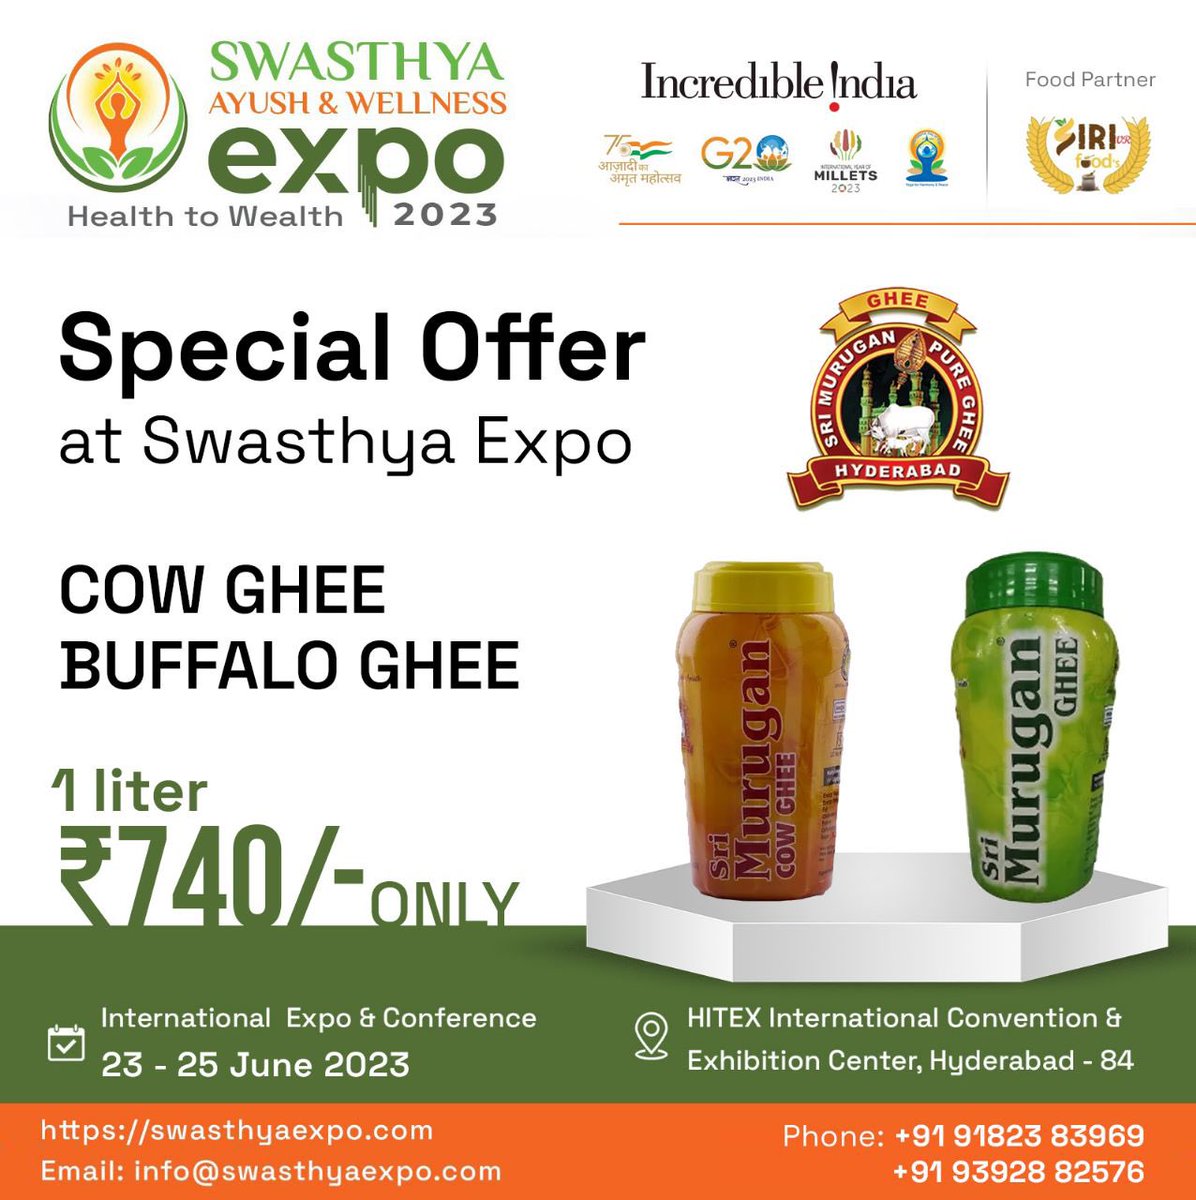 Special Offer at Swasthya Expo
Sri Murugan Pure COW GHEE & BUFFALO GHEE 1 Liter Rs.740/- Only

#cowghee #buffaloghee #pureghee #srimuruganghee #swasthyaexpo